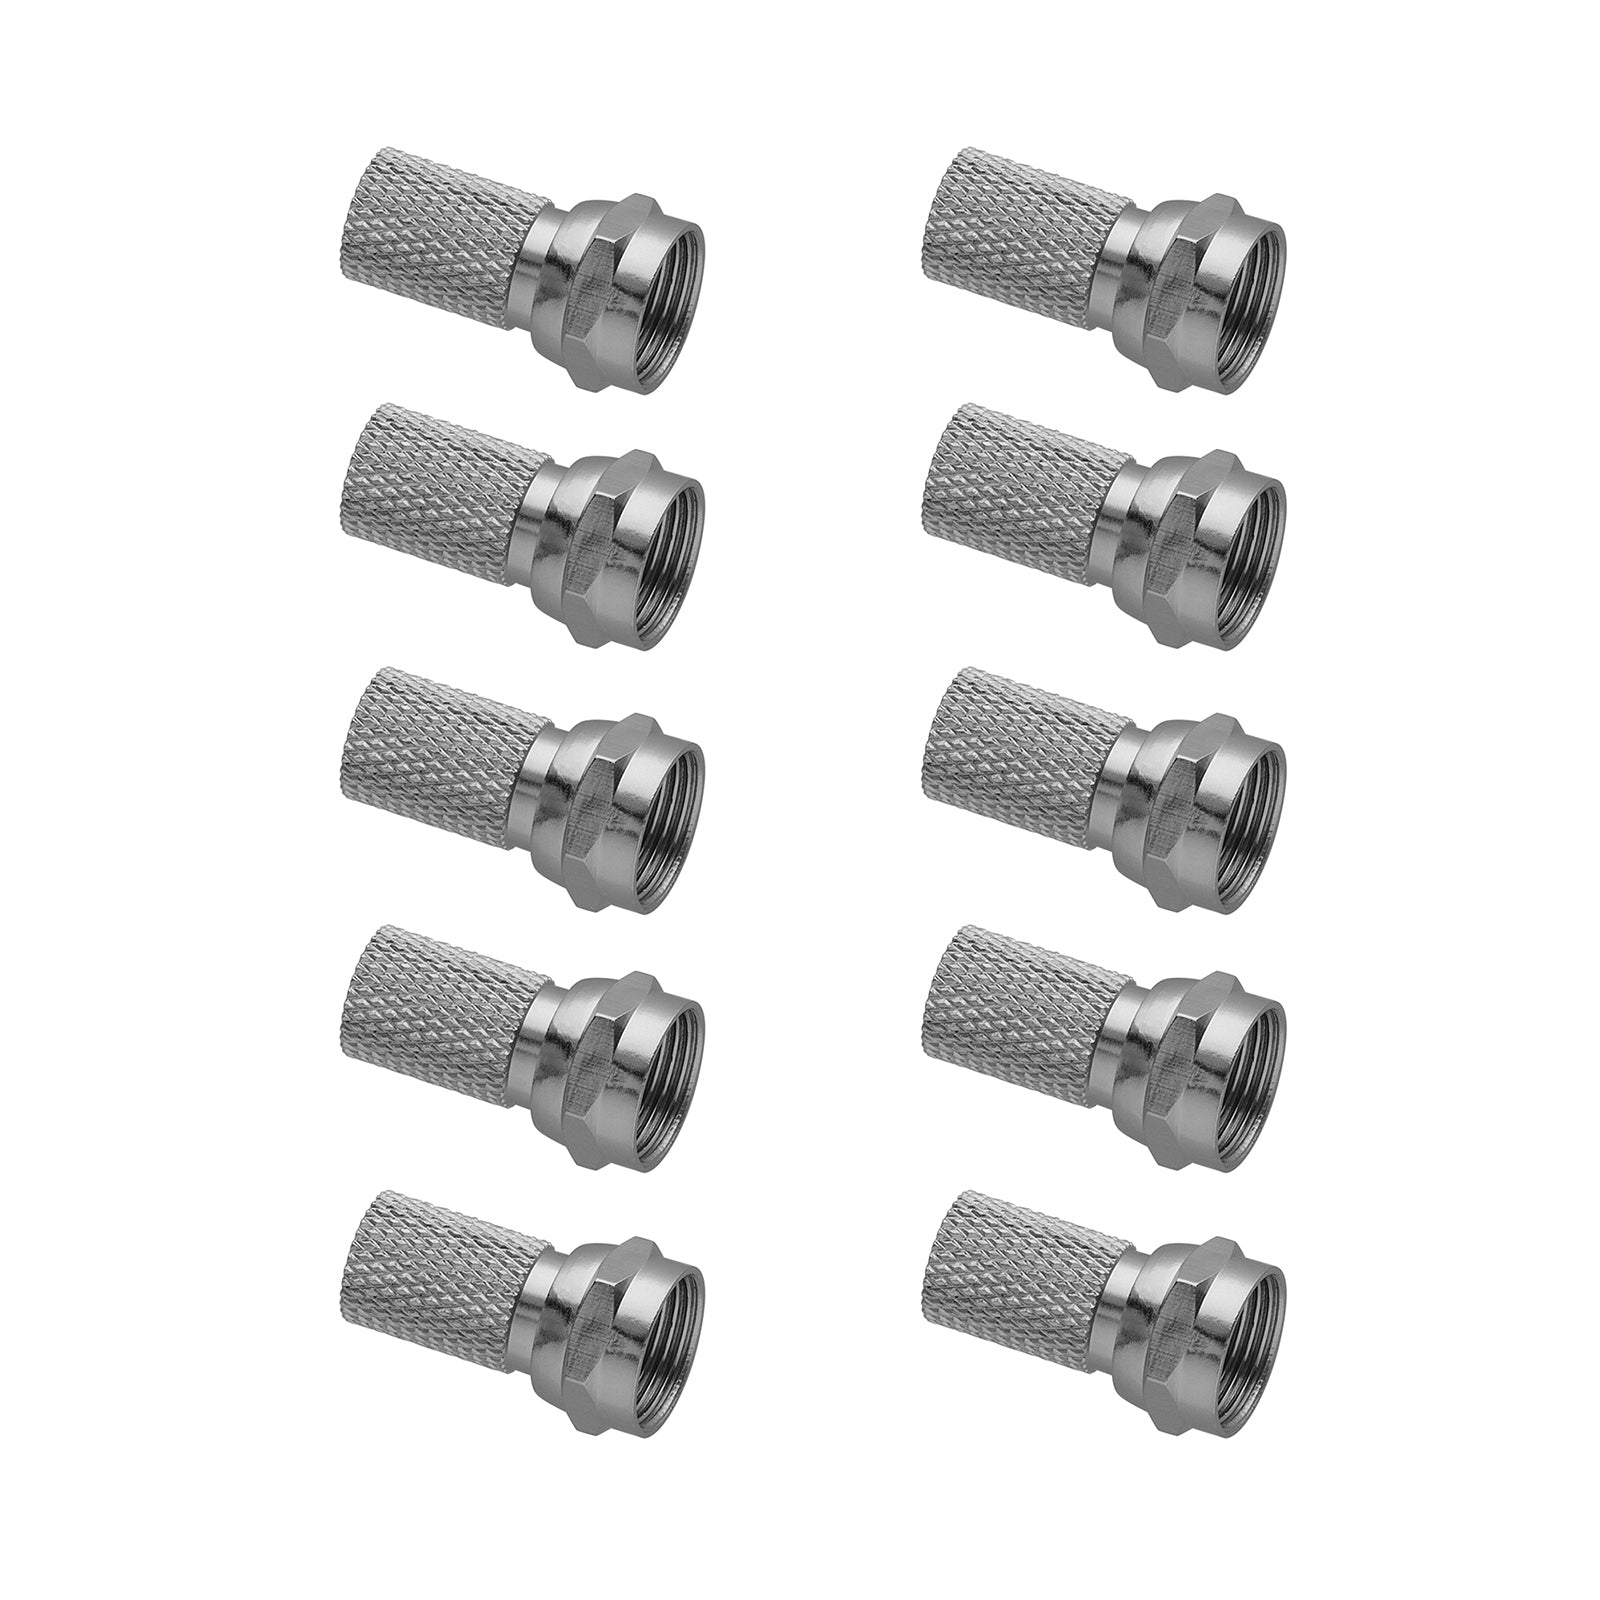 F59 Type Twist-On Plug Suits RG-6 Cable - 10 Pack